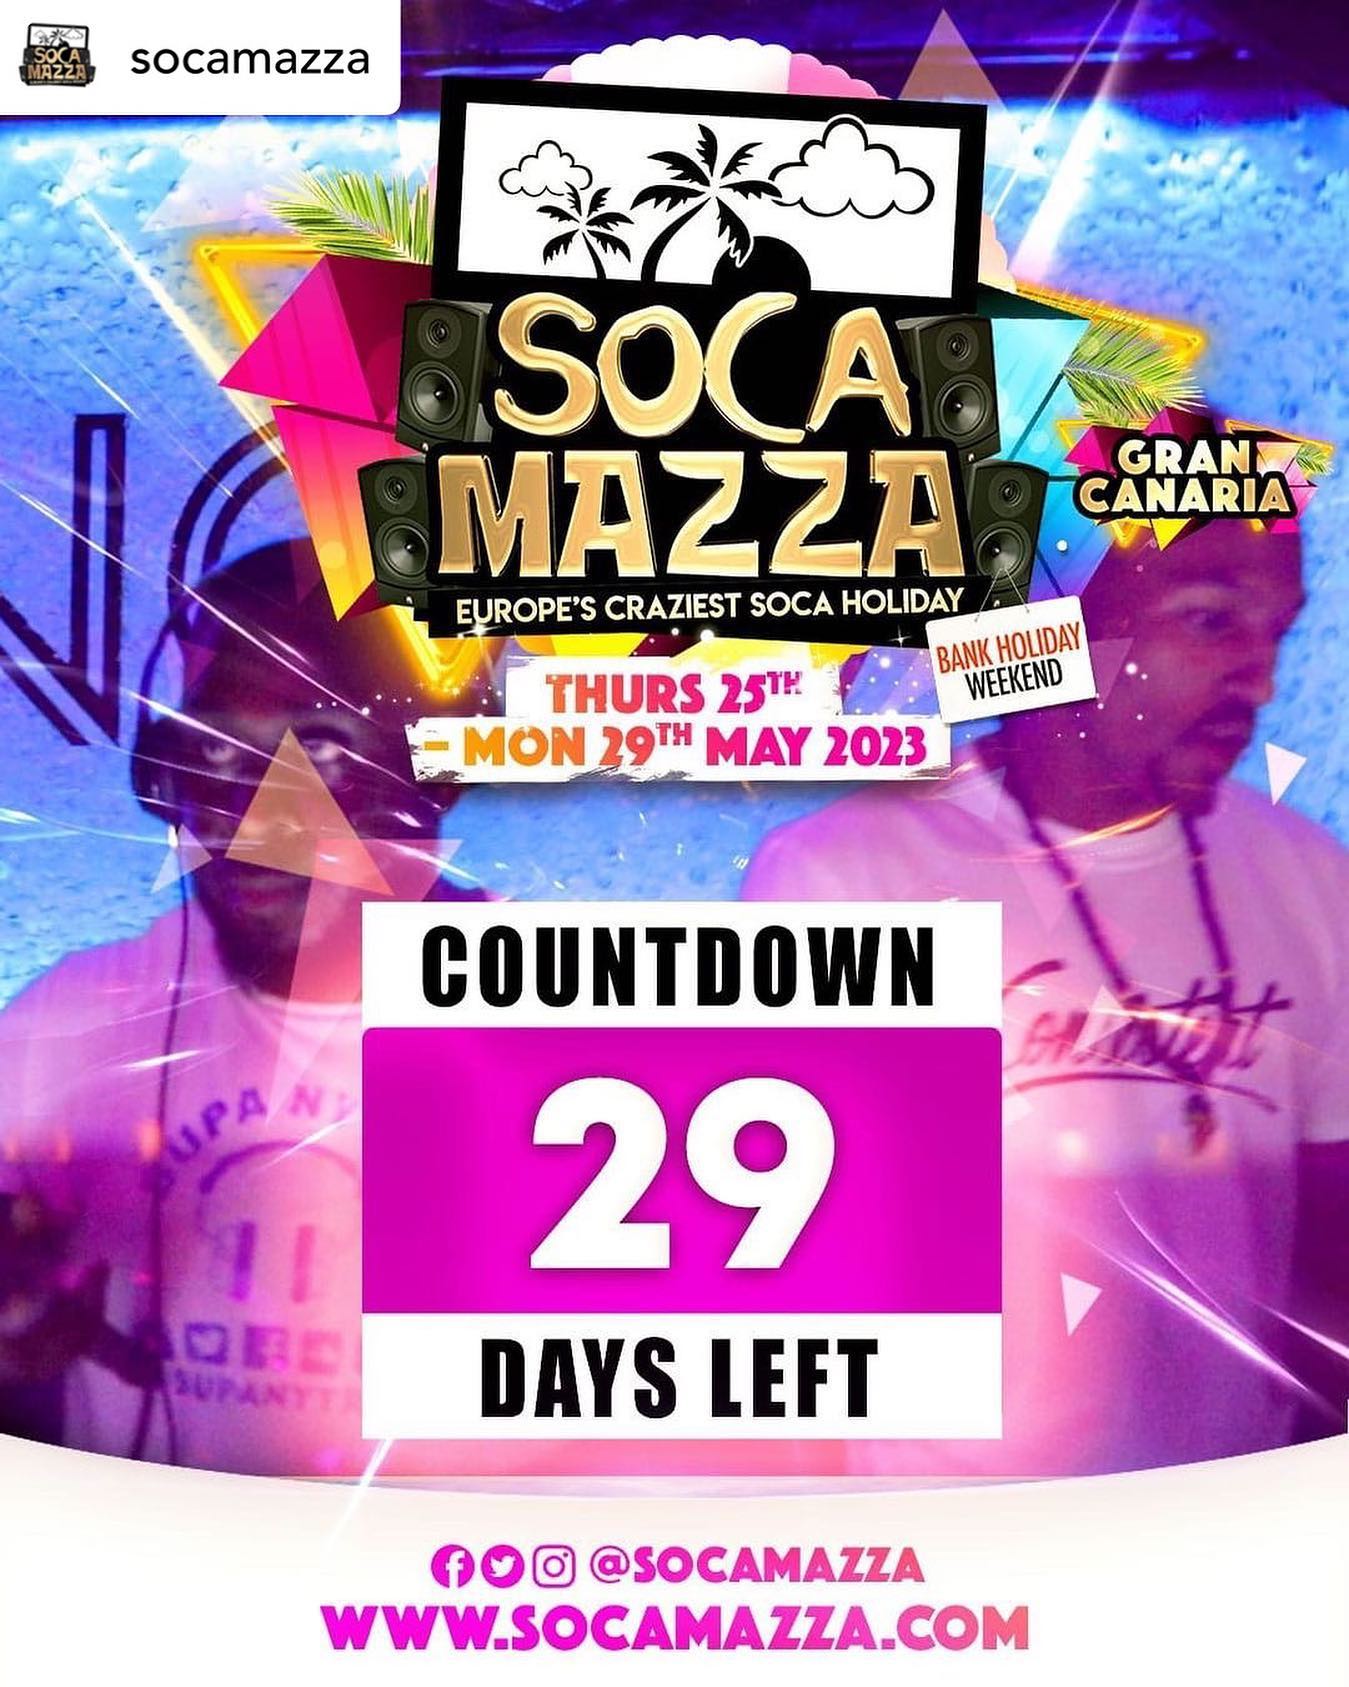 Just under 29 days left until we're partying away in Gran Canaria. Our events only packages are running extremely low so purchase your package today before we're completely sold out

Book now at www.socamazza.com
@SocaMazza